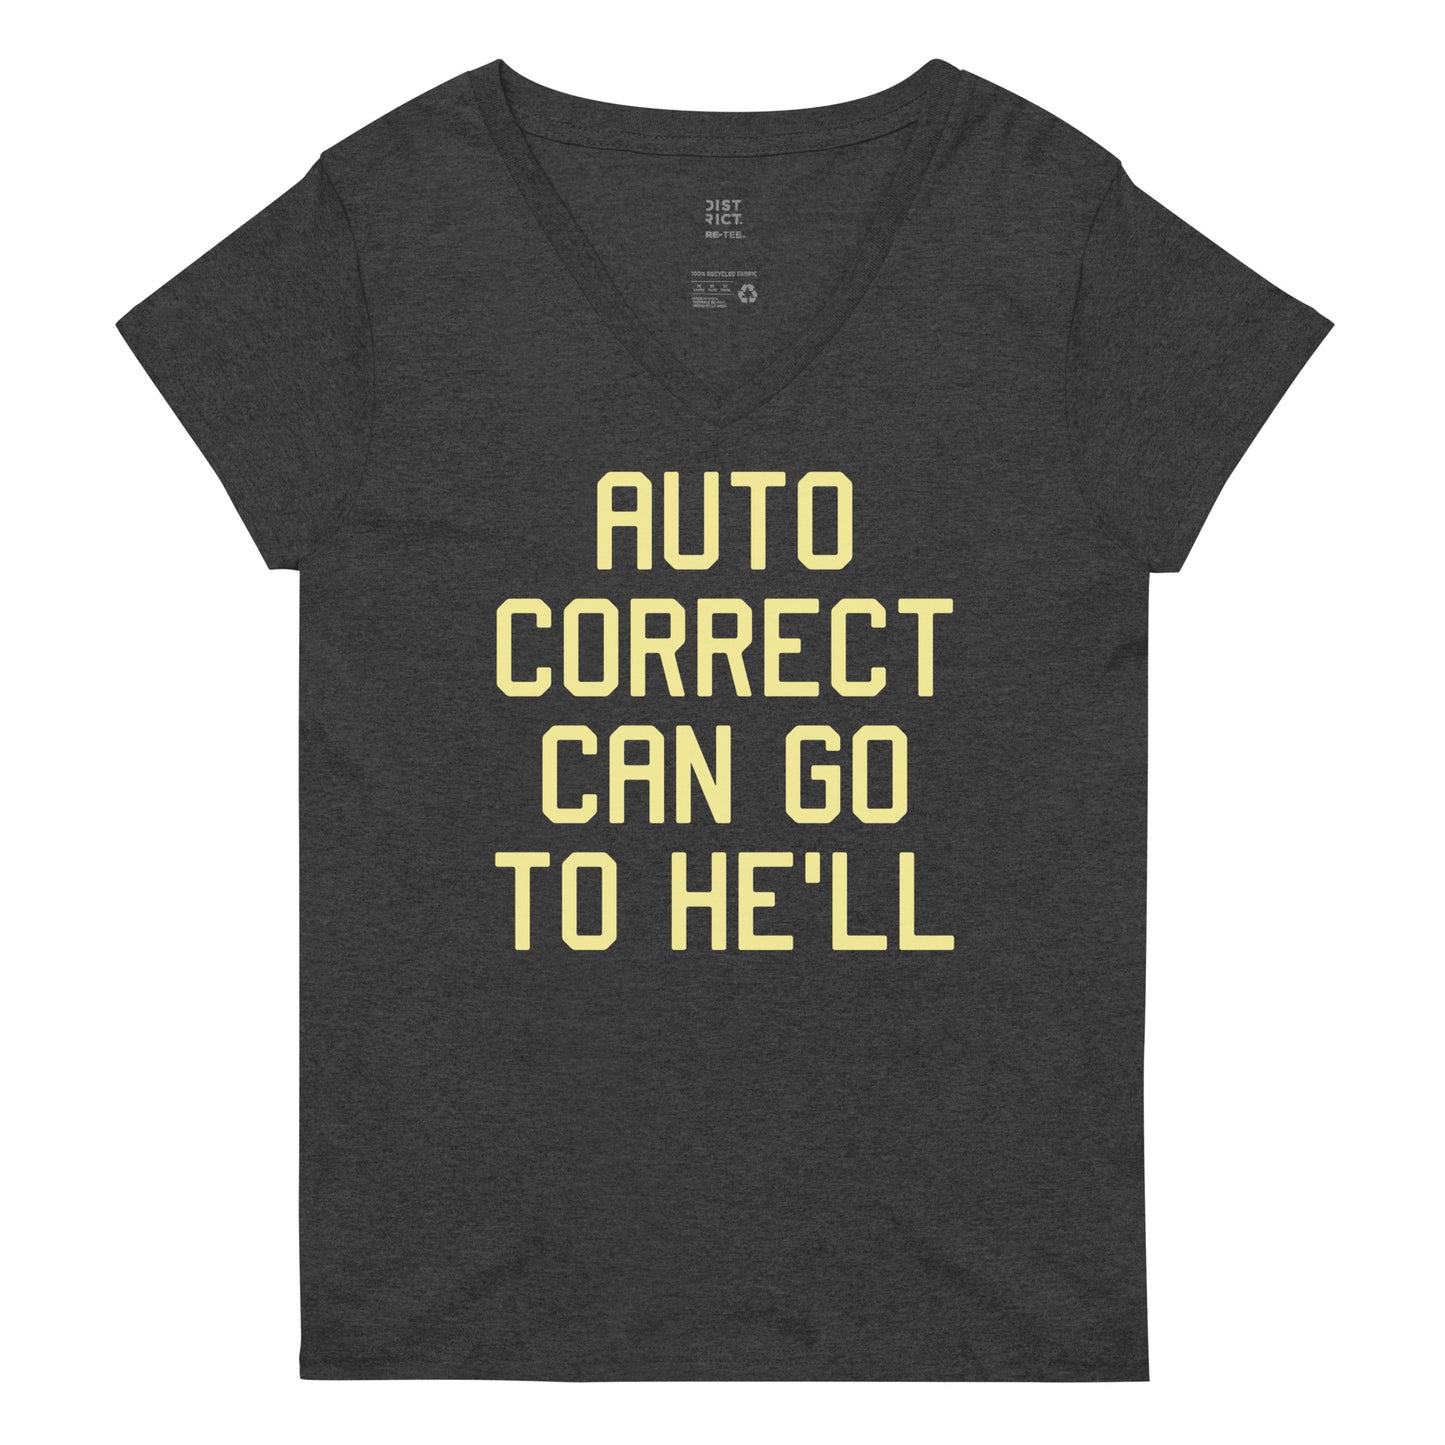 Auto Correct Can Go To He'll Women's V-Neck Tee